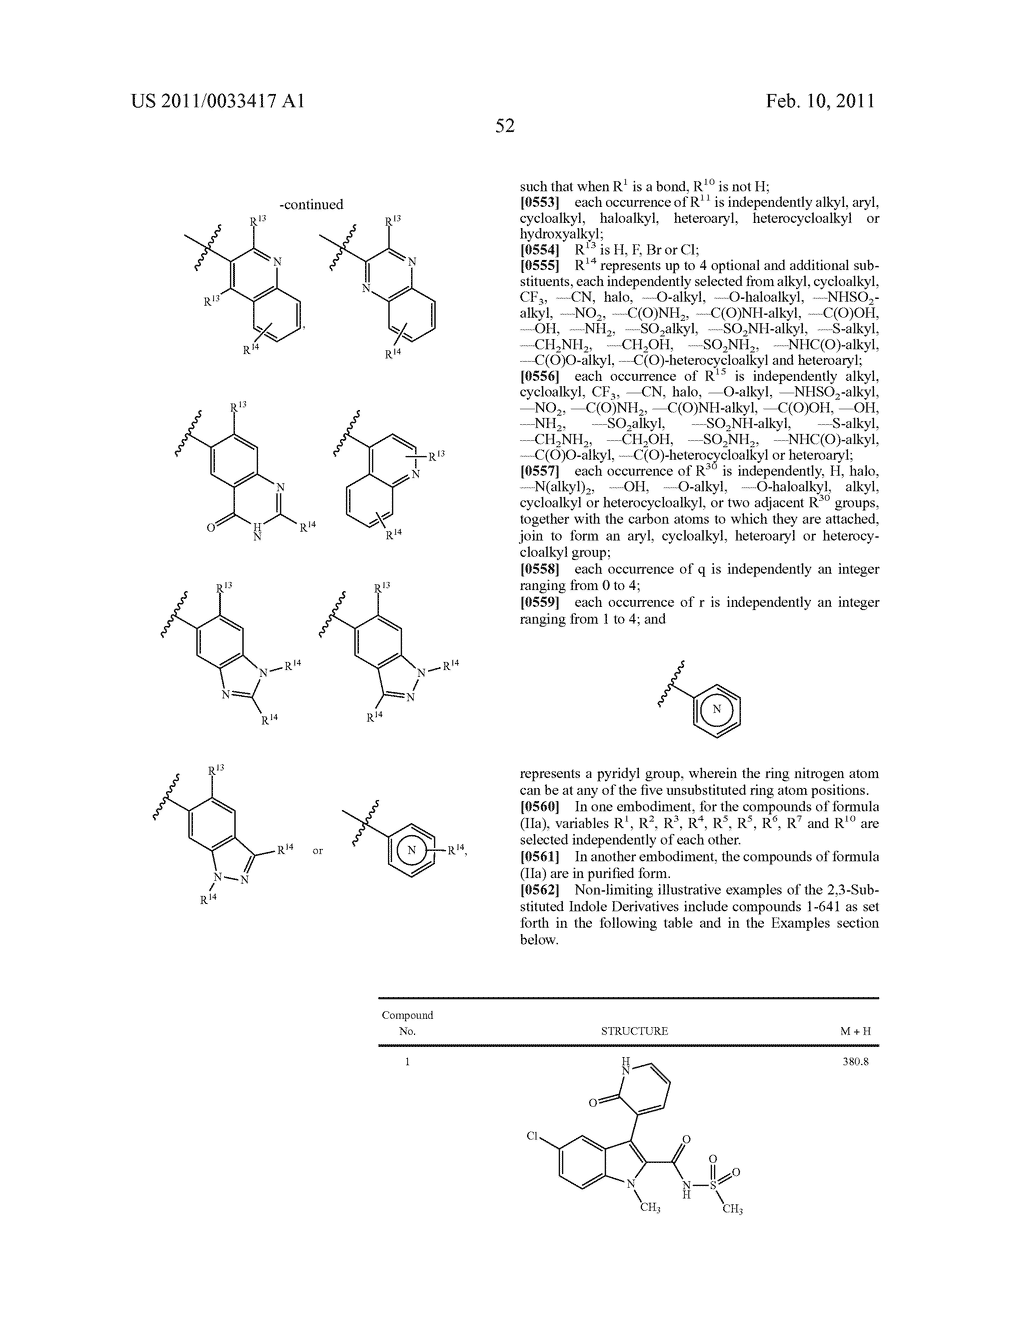 2,3-SUBSTITUTED INDOLE DERIVATIVES FOR TREATING VIRAL INFECTIONS - diagram, schematic, and image 53